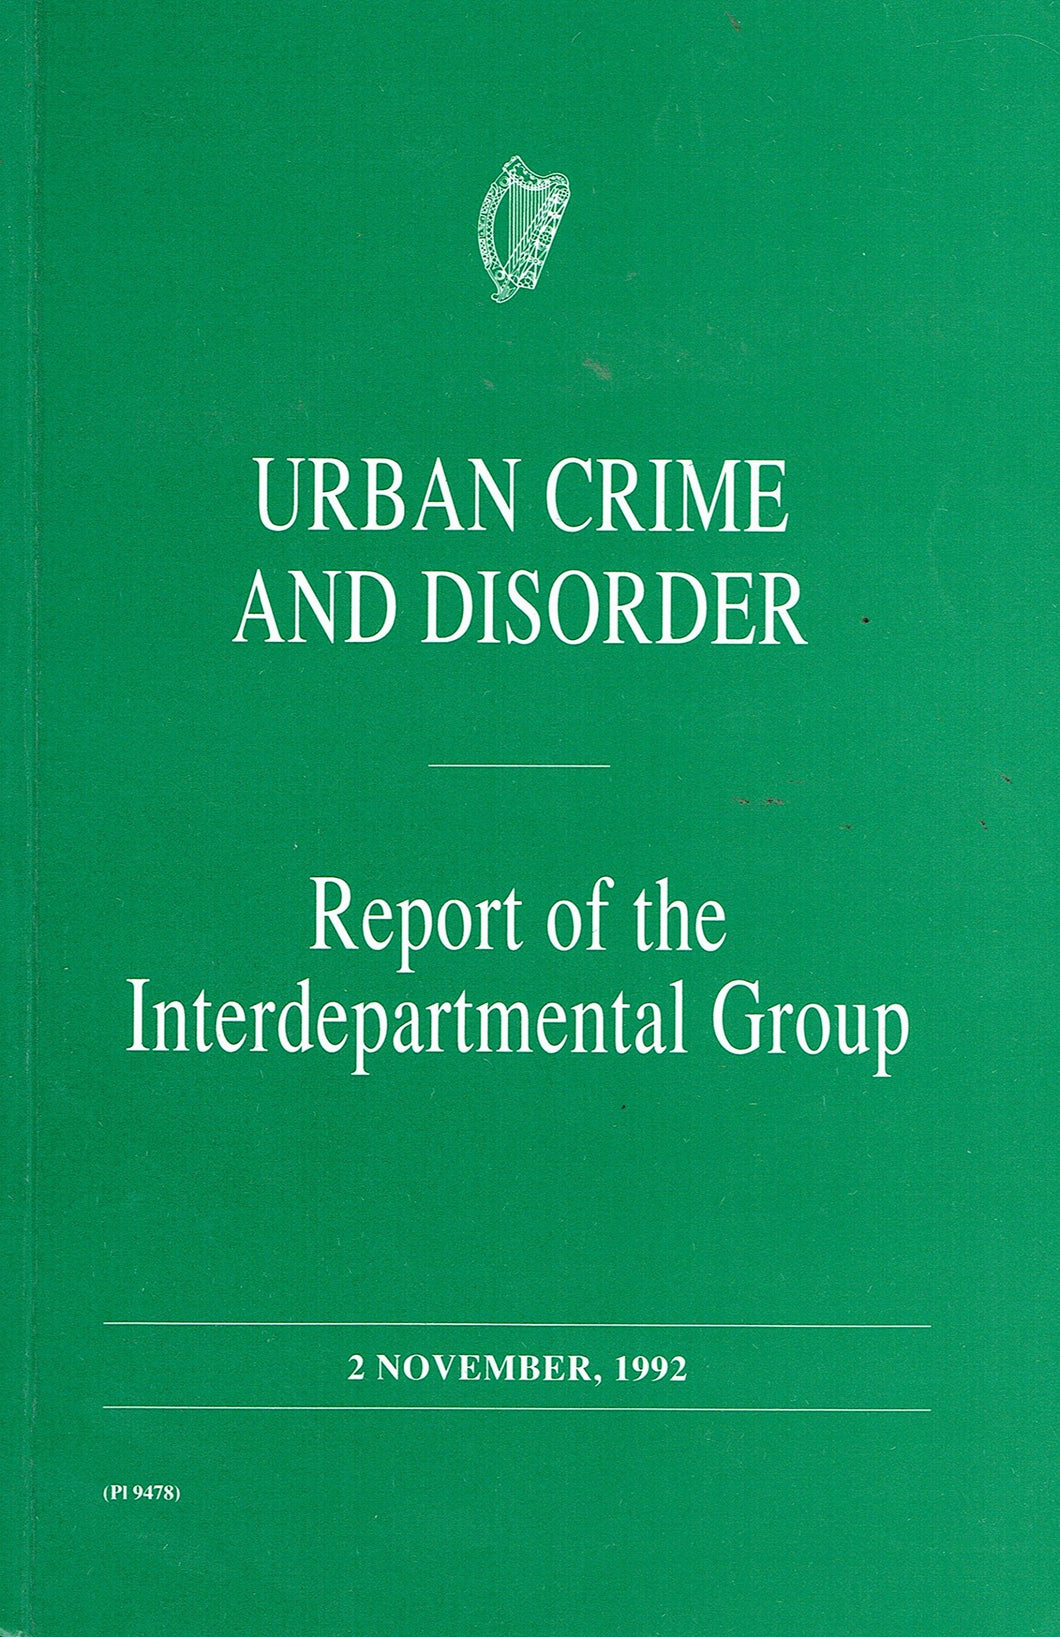 Urban Crime and Disorder: Report of the Interdepartmental Group